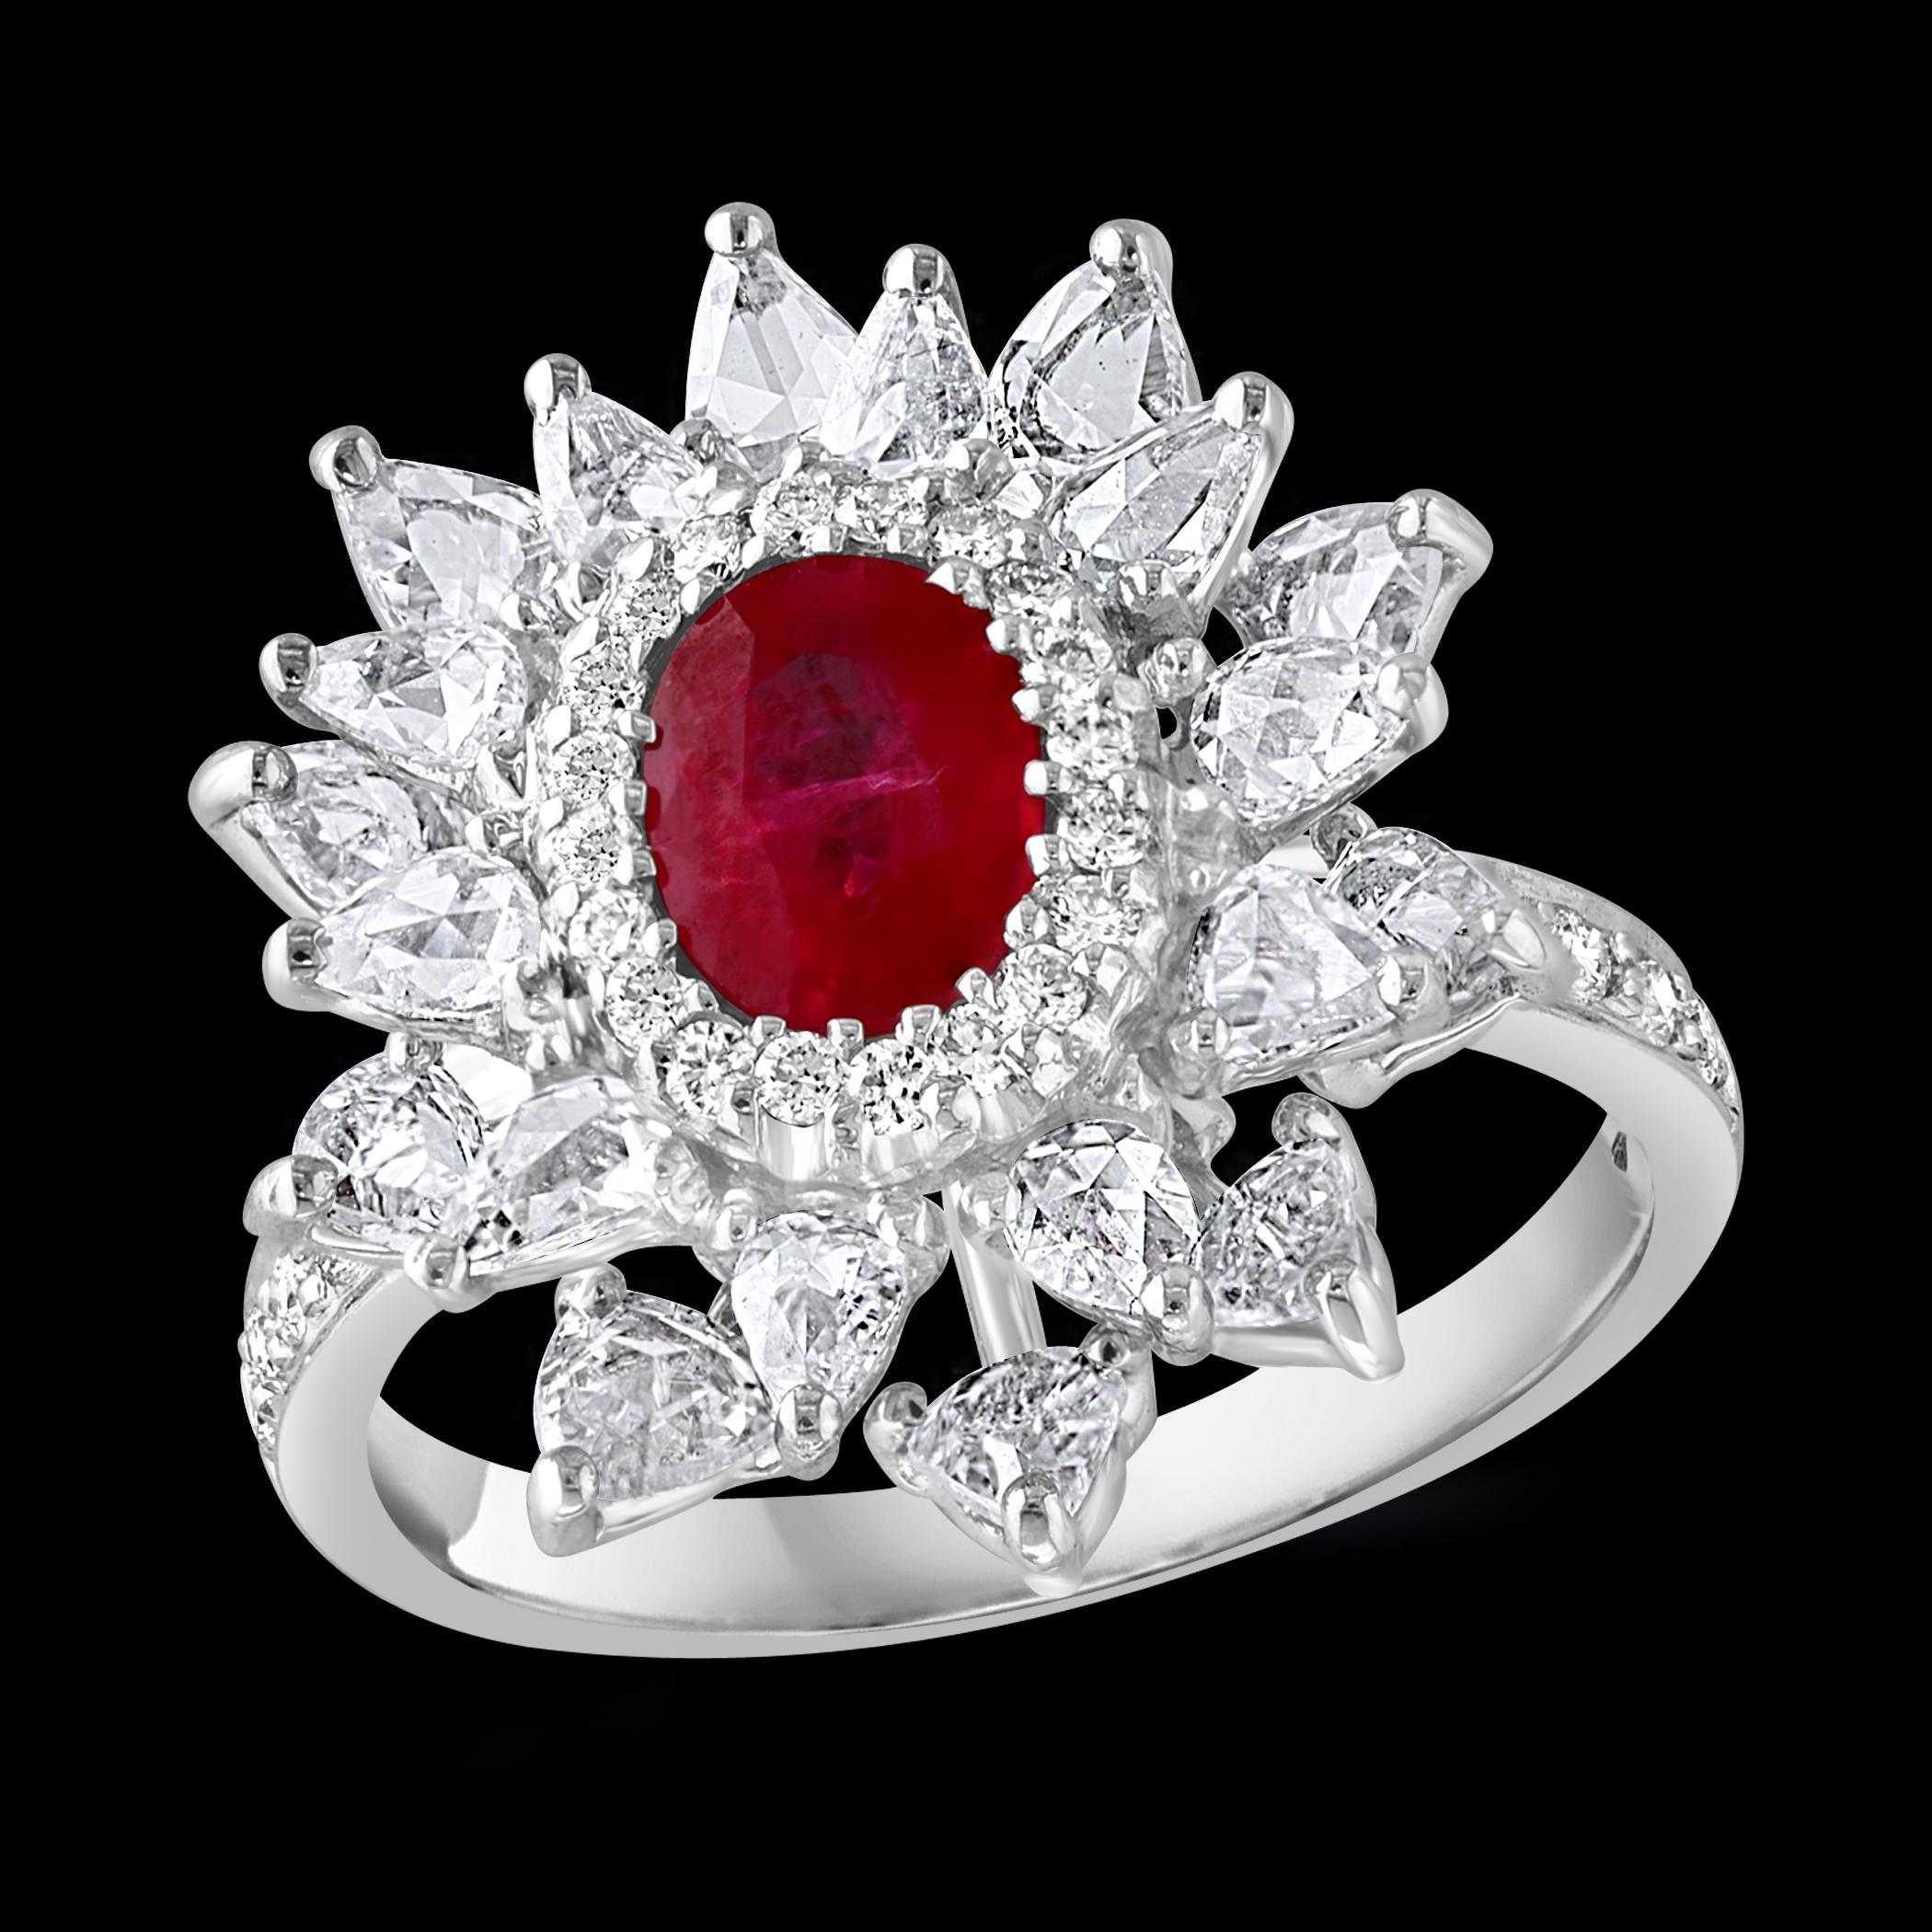 Introducing our exquisite 18 Karat Gold Ring, featuring a stunning 1.1 carat natural oval Ruby and approximately 2 carats of rose cut pear shape diamonds. This ring is a true testament to beauty and elegance. The natural Ruby in this ring is of